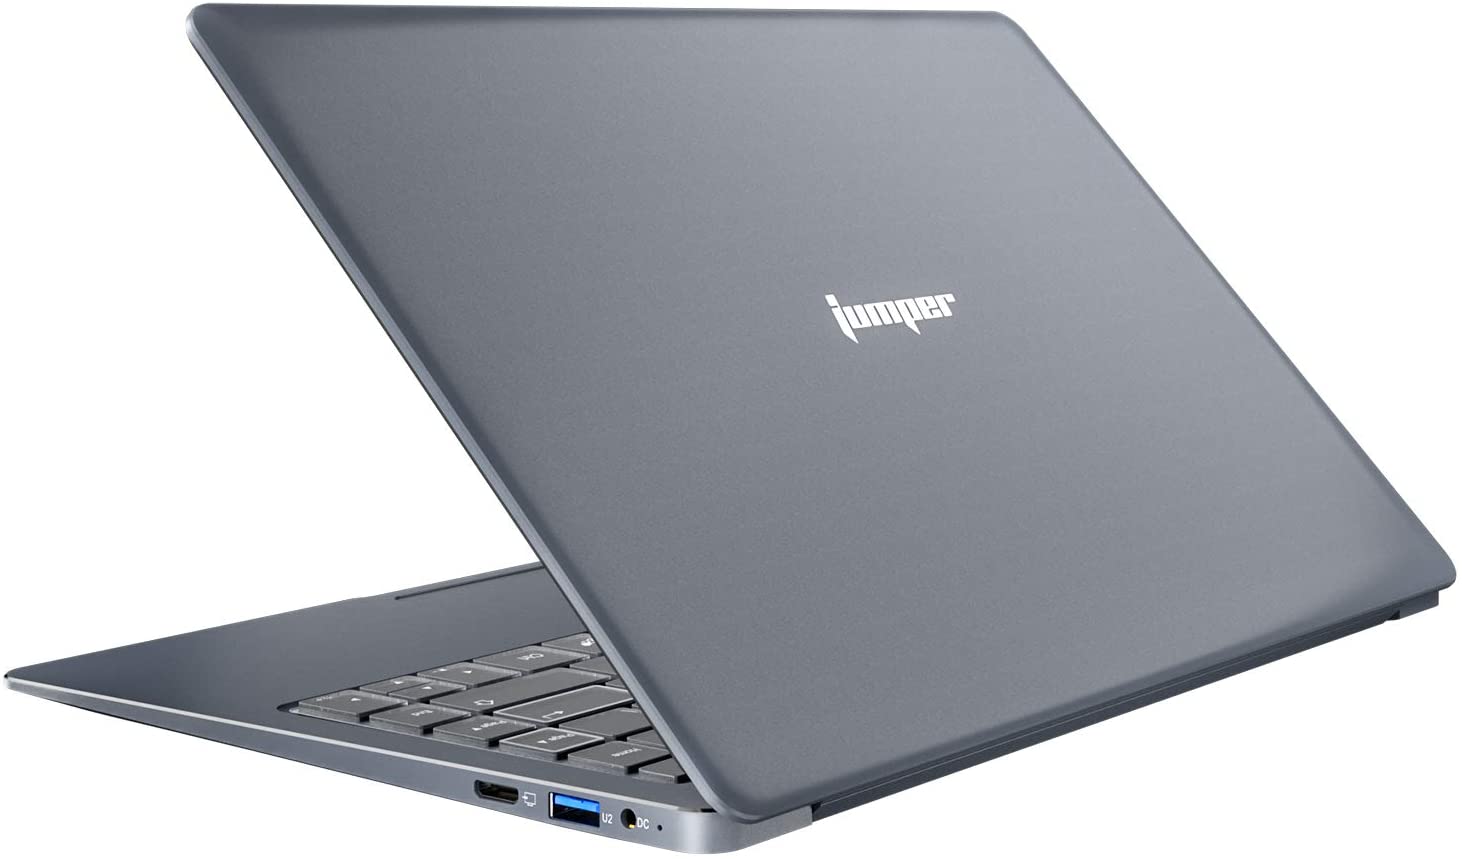 Jumper EZbook X3 Review: Ancient technology meets wobbly chassis